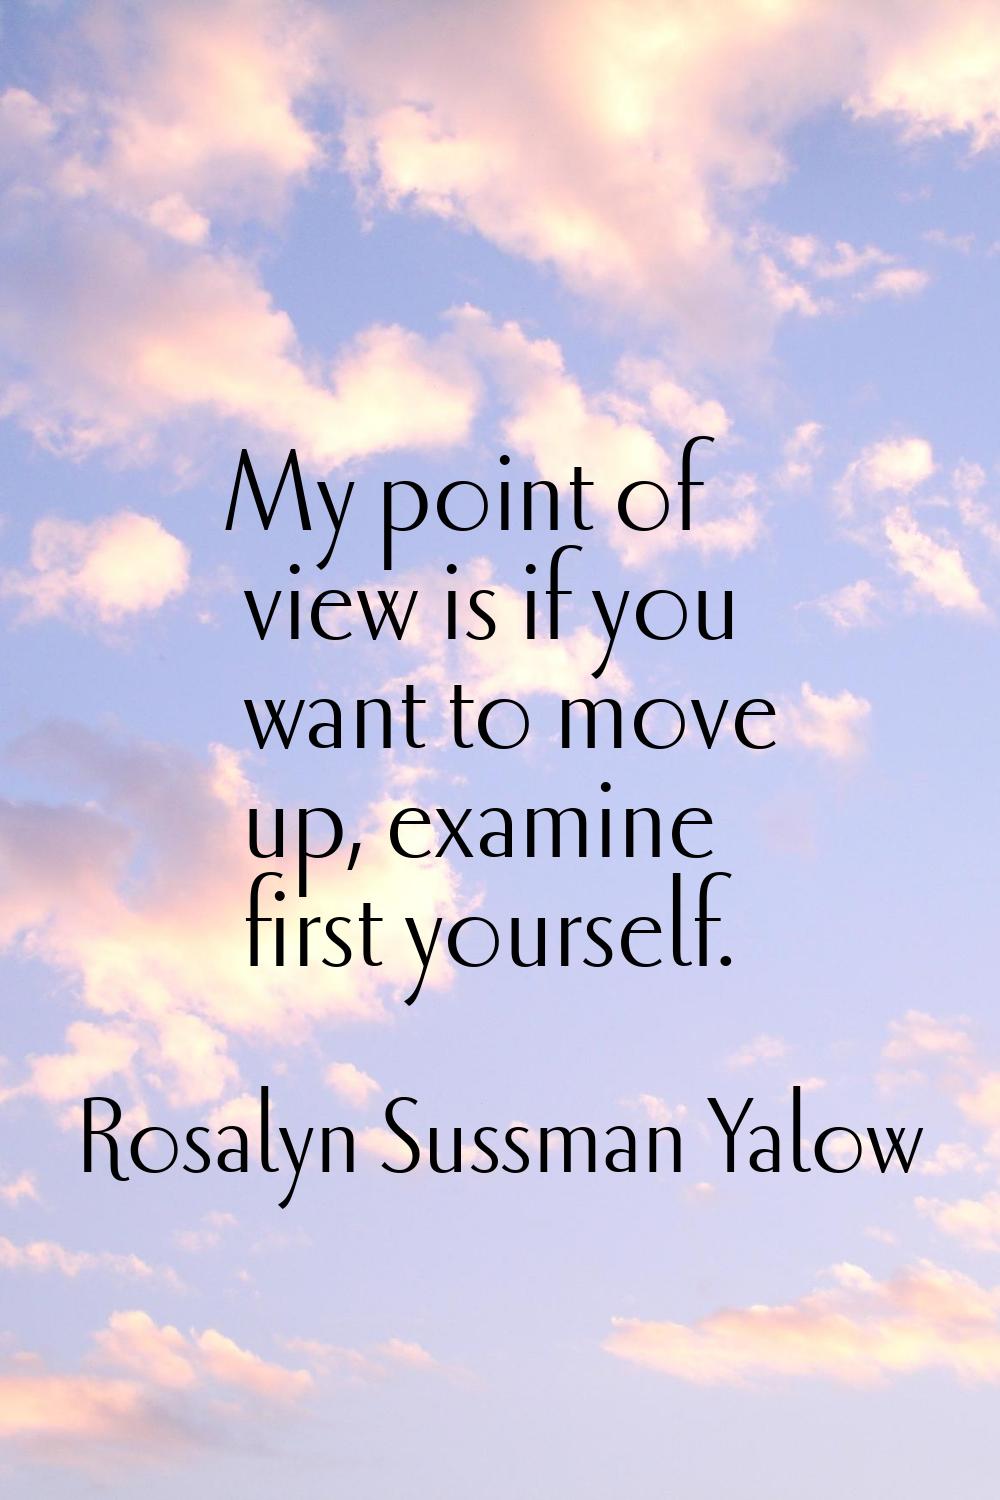 My point of view is if you want to move up, examine first yourself.